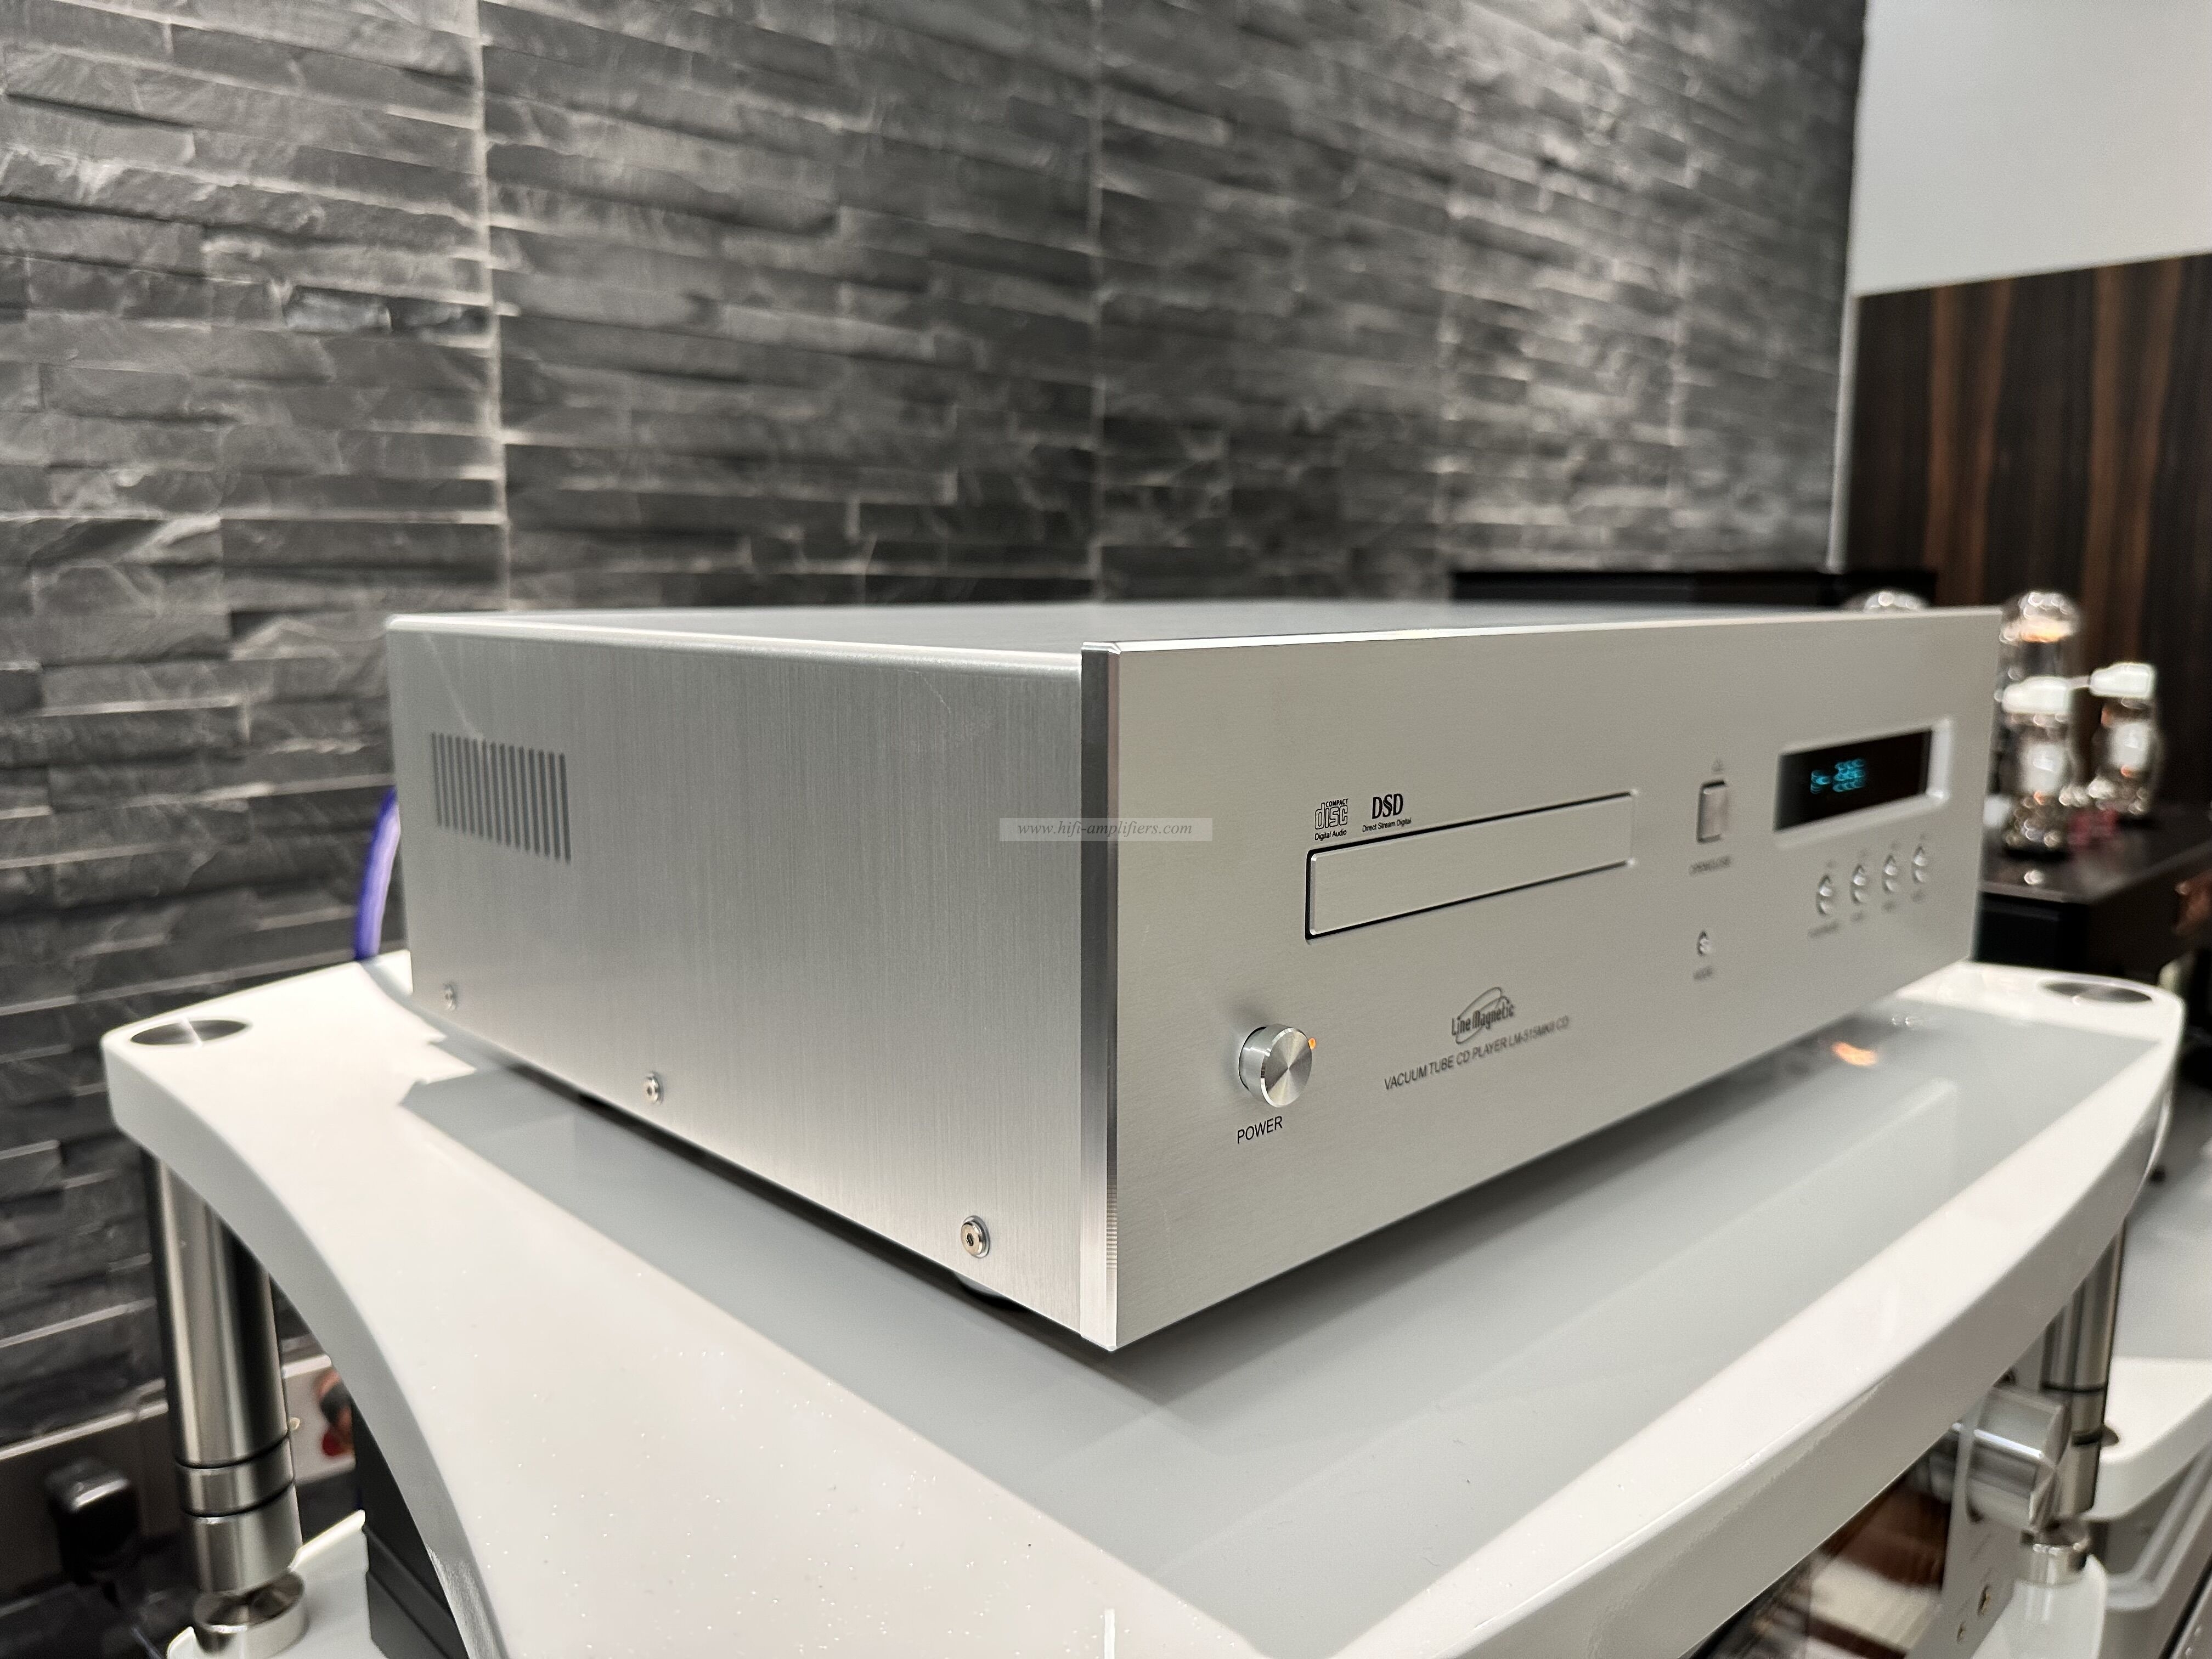 Line magnetic LM-515CD MKII 6KZ8 tube Output tube CD Player Power Amplifier ES9016 Decoding DAC